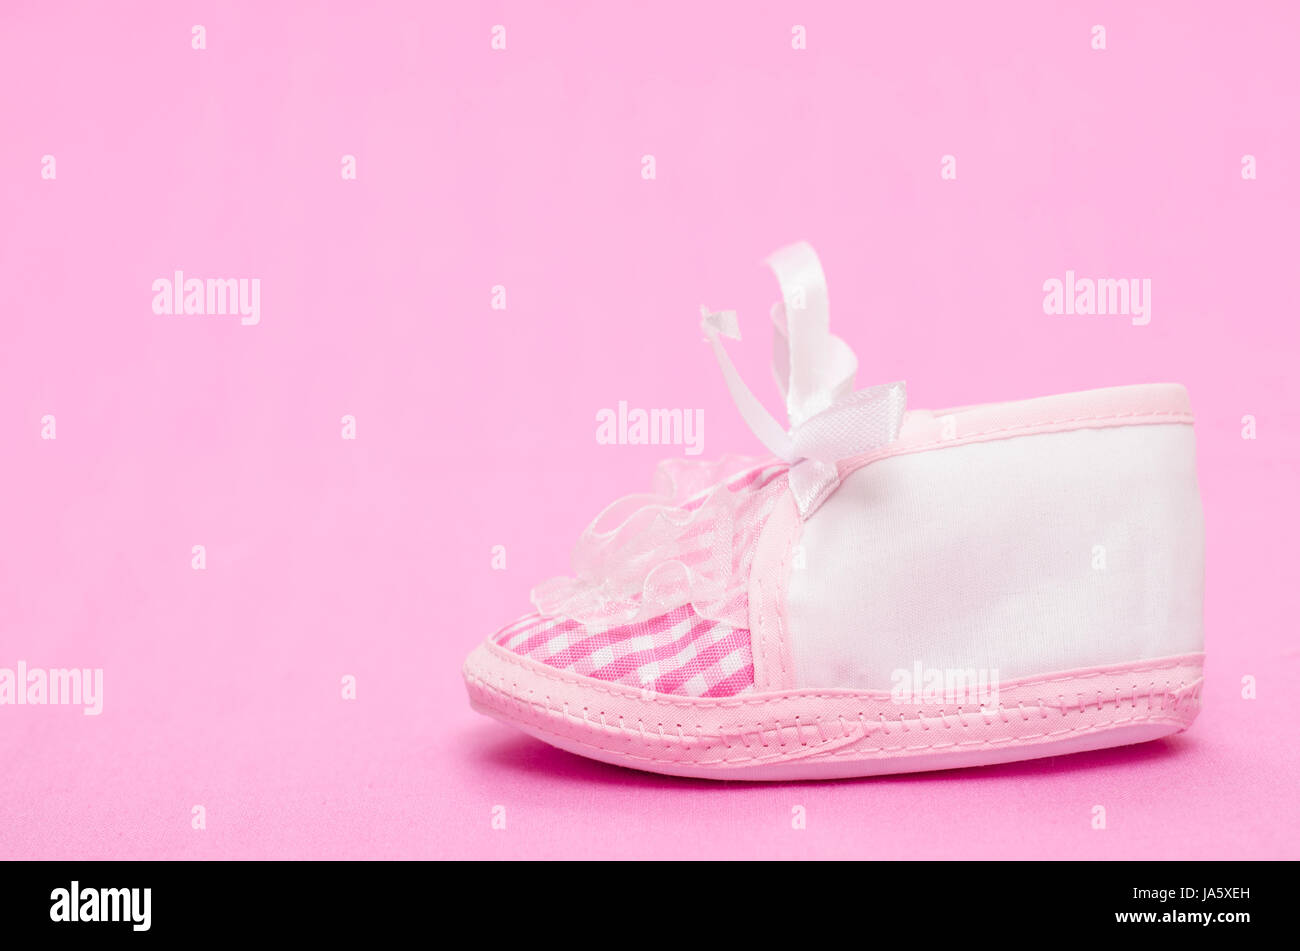 female baby shoes on pink background Stock Photo